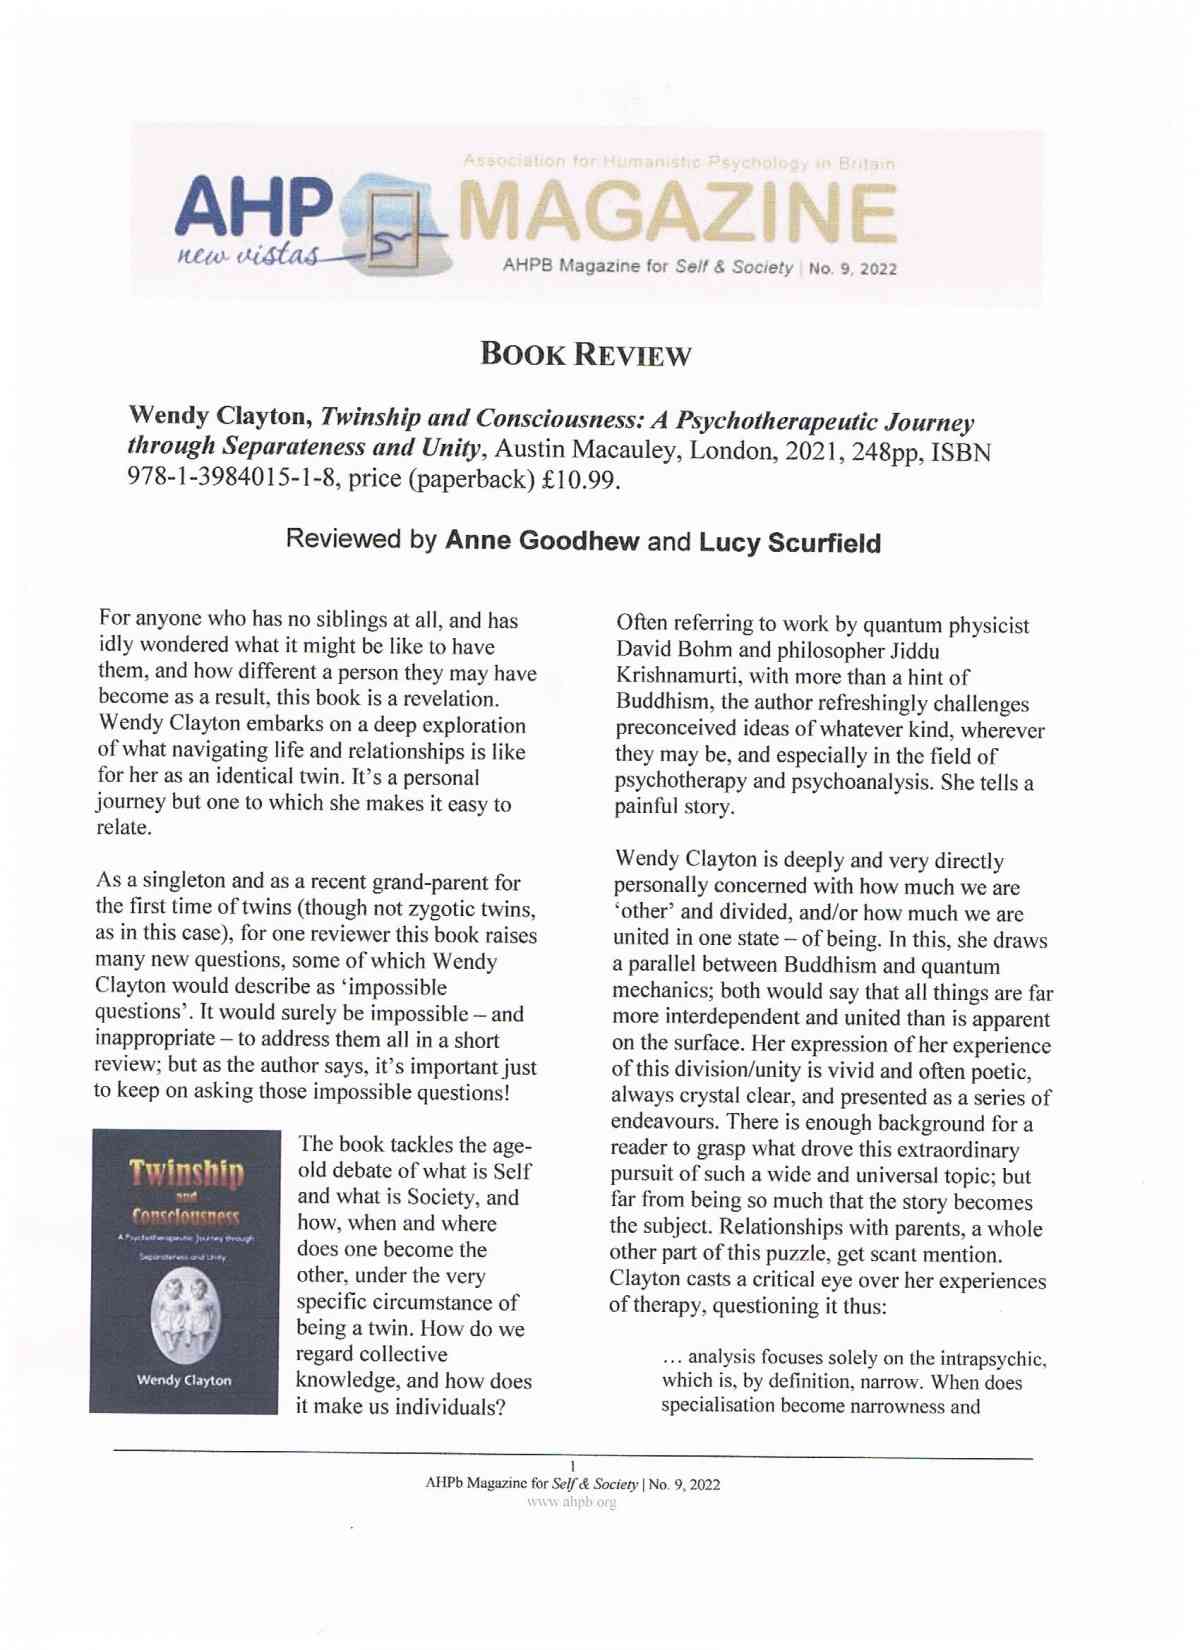 Book Review of Twinship and Consciousness in AHPB Magazine